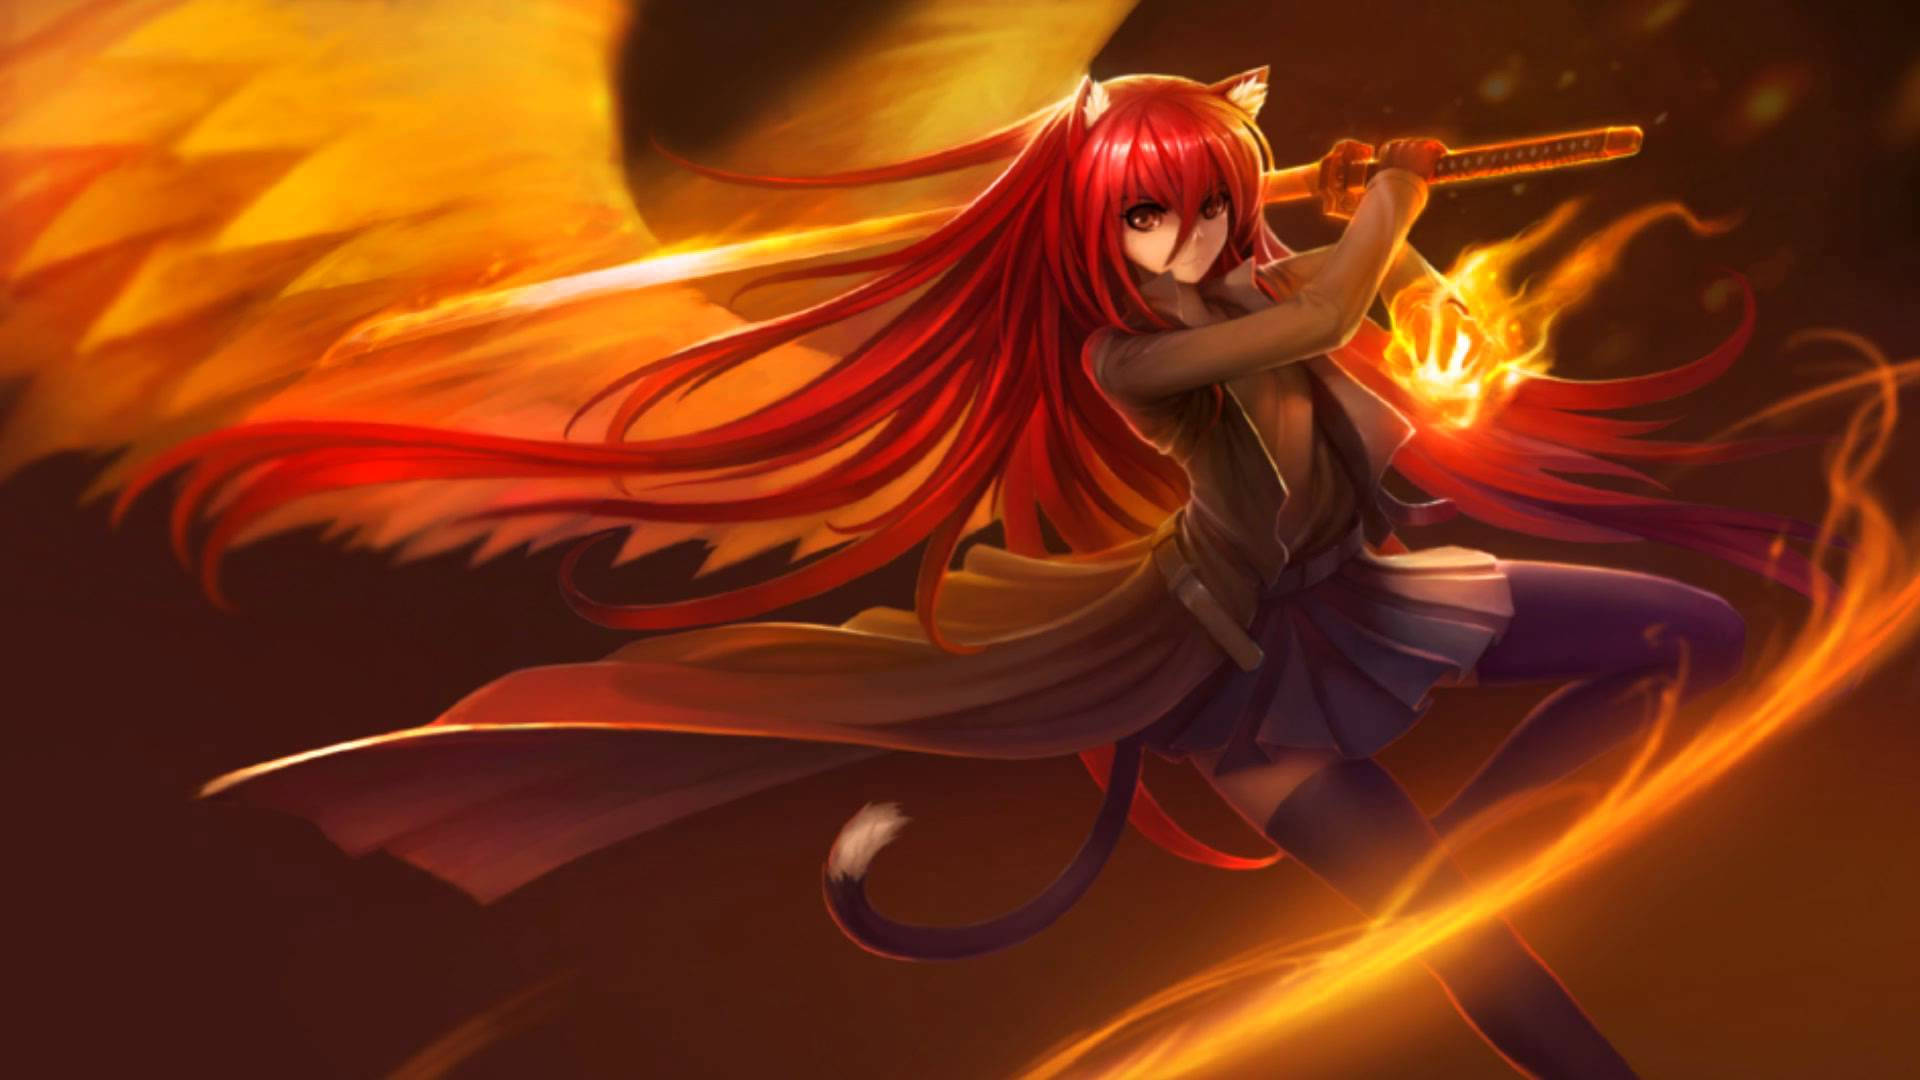 Cat Warrior Girl With Fire Wings Wallpaper